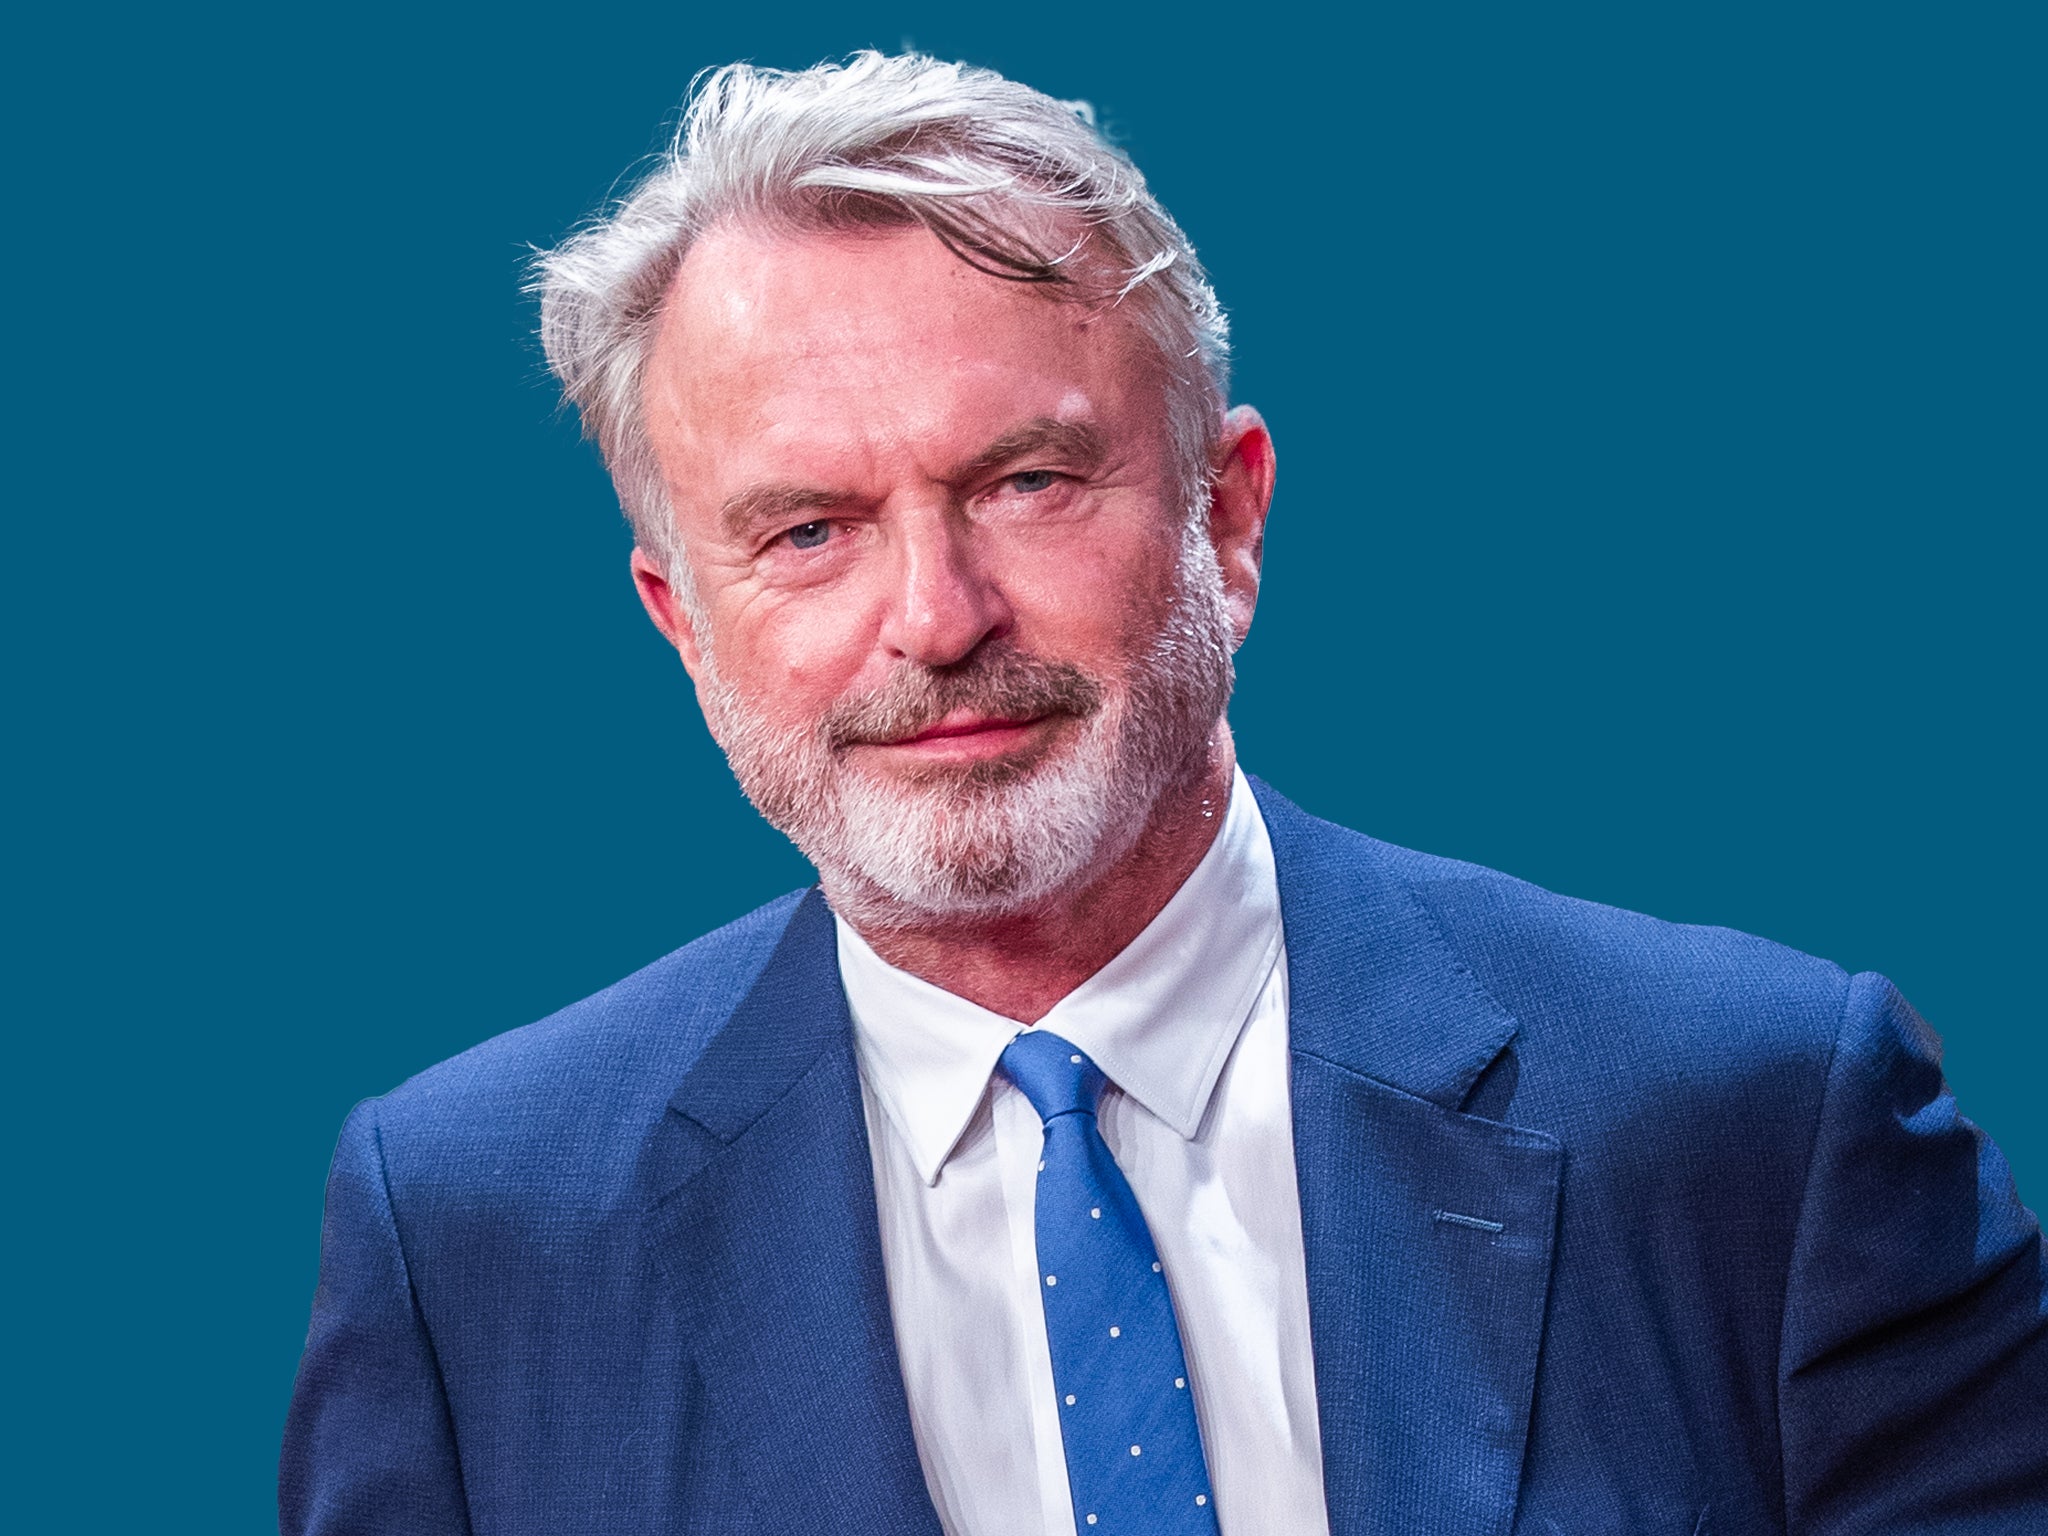 Sam Neill revealed he is in remission for stage three cancer